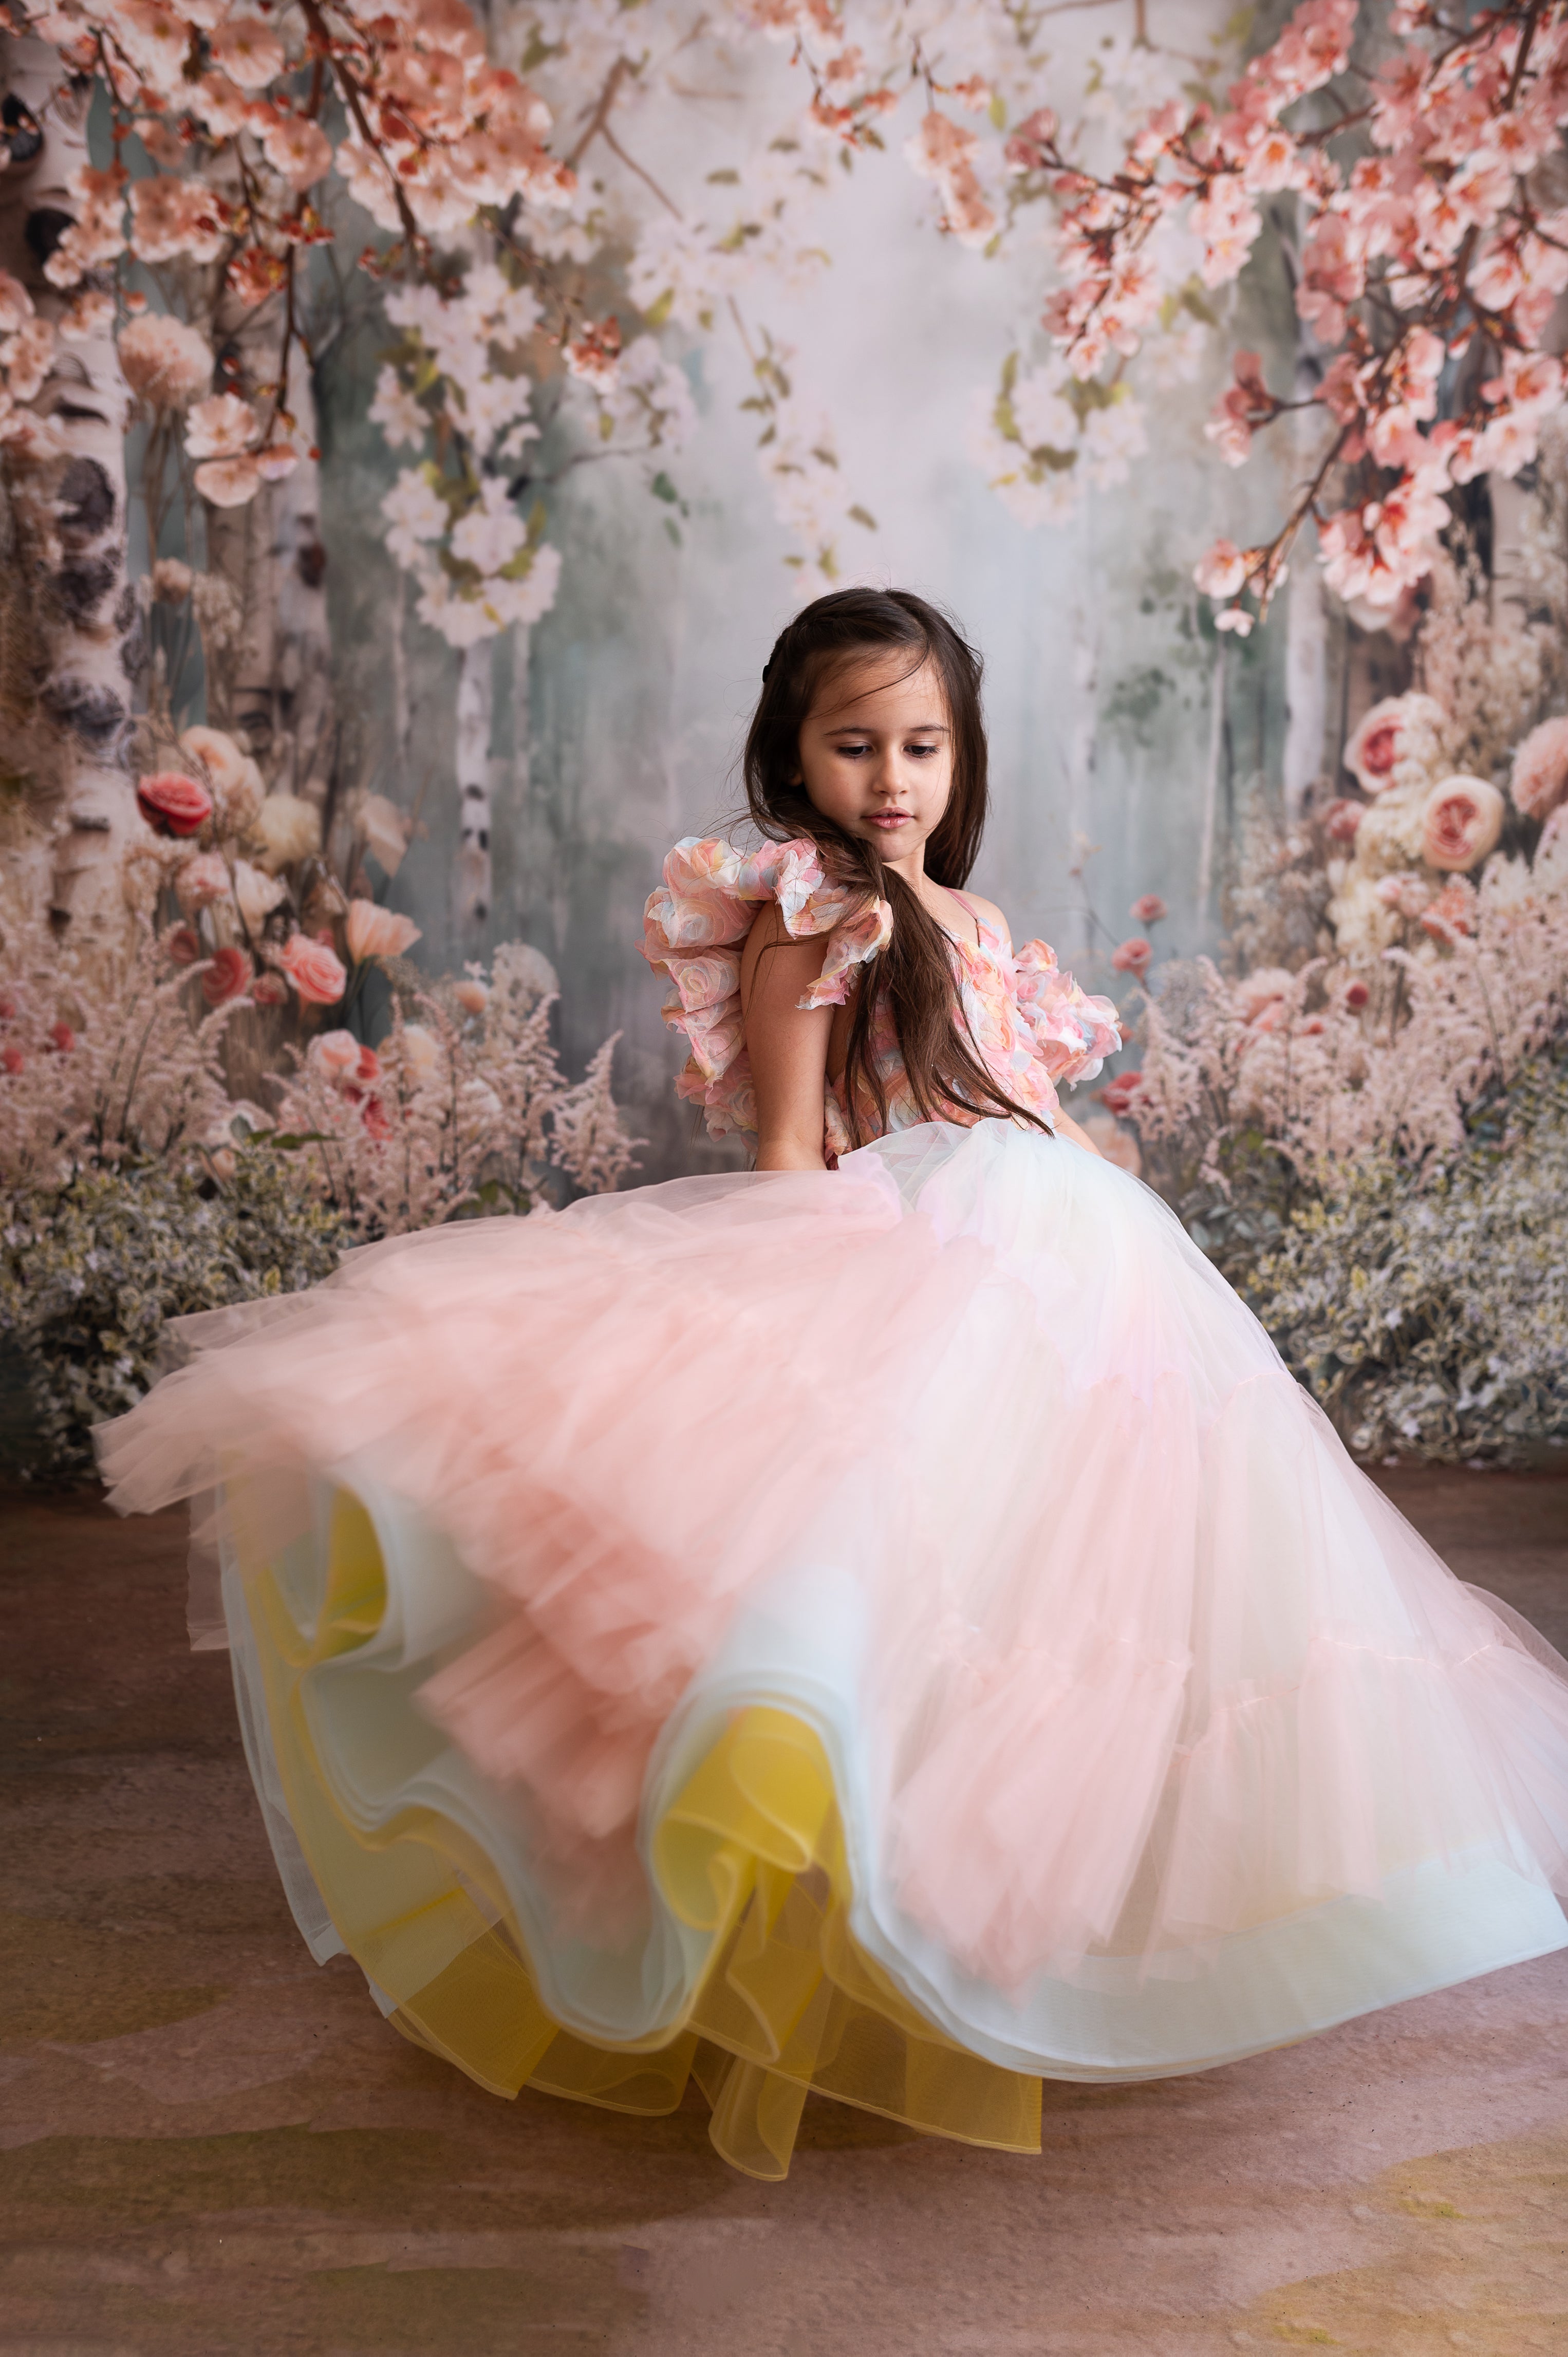 CHILDREN'S GOWNS FOR PHOTOGRAPHY SESSIONS